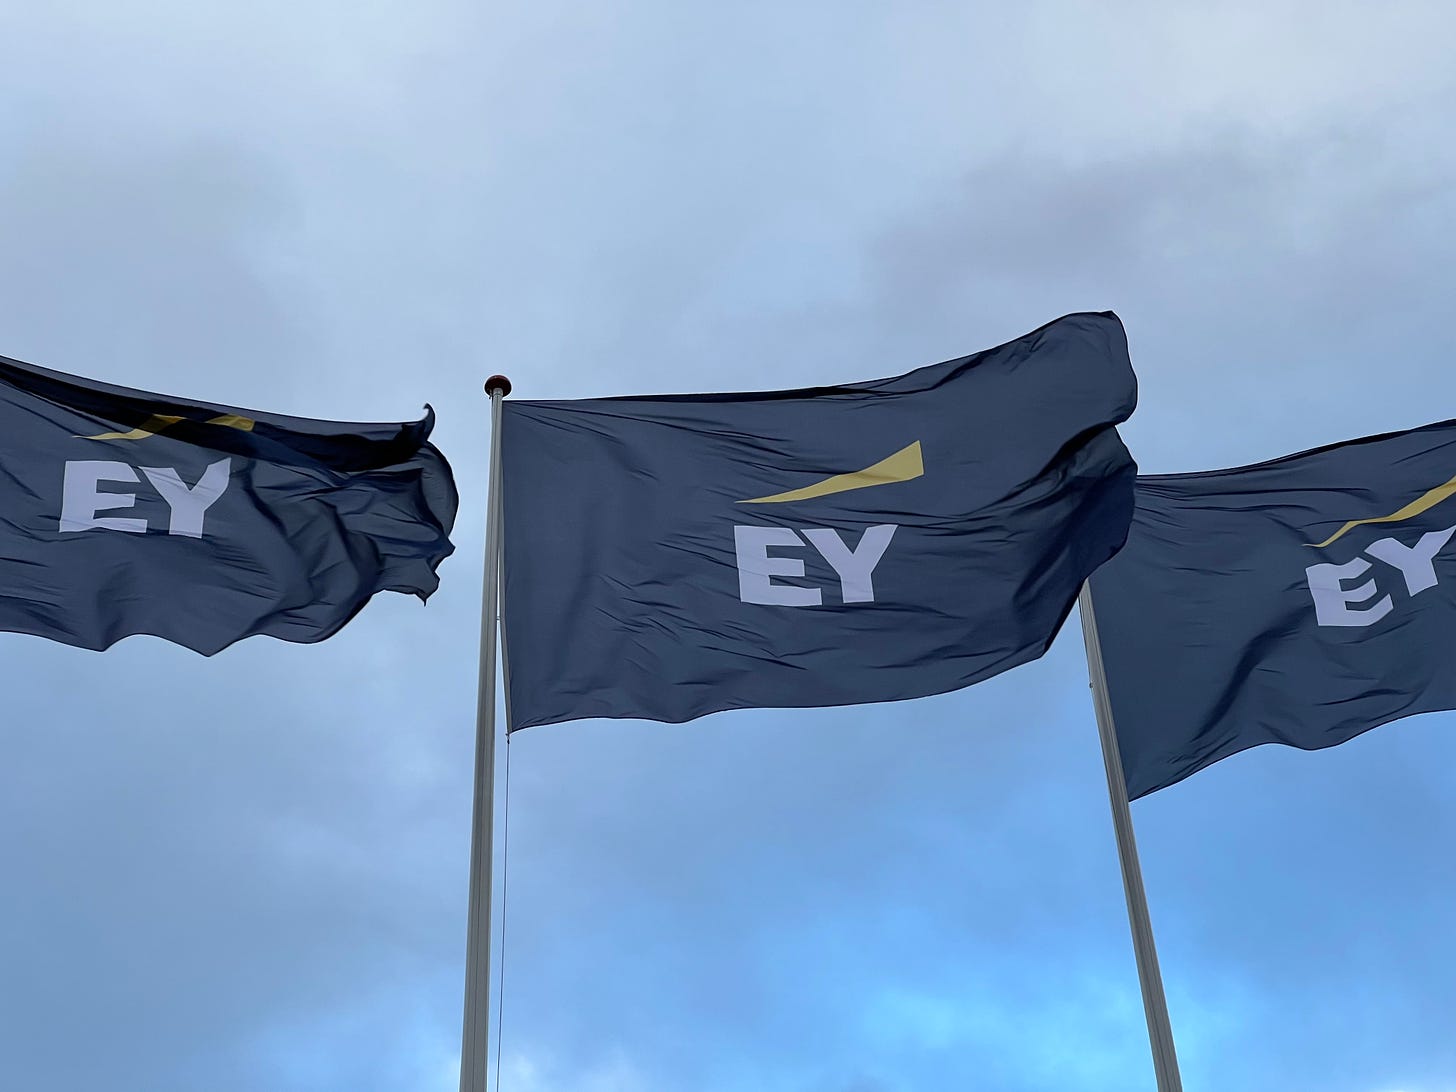 Three black flags near the west entrance no. 6 present during the EY NMADP 2022 (14-18 November) and EY NSMADP 2022, at the Bella Center Copenhagen Congress Center, featuring the logo of Ernst & Young (EY) in white and yellow colors. A cloudy sky shown in the background